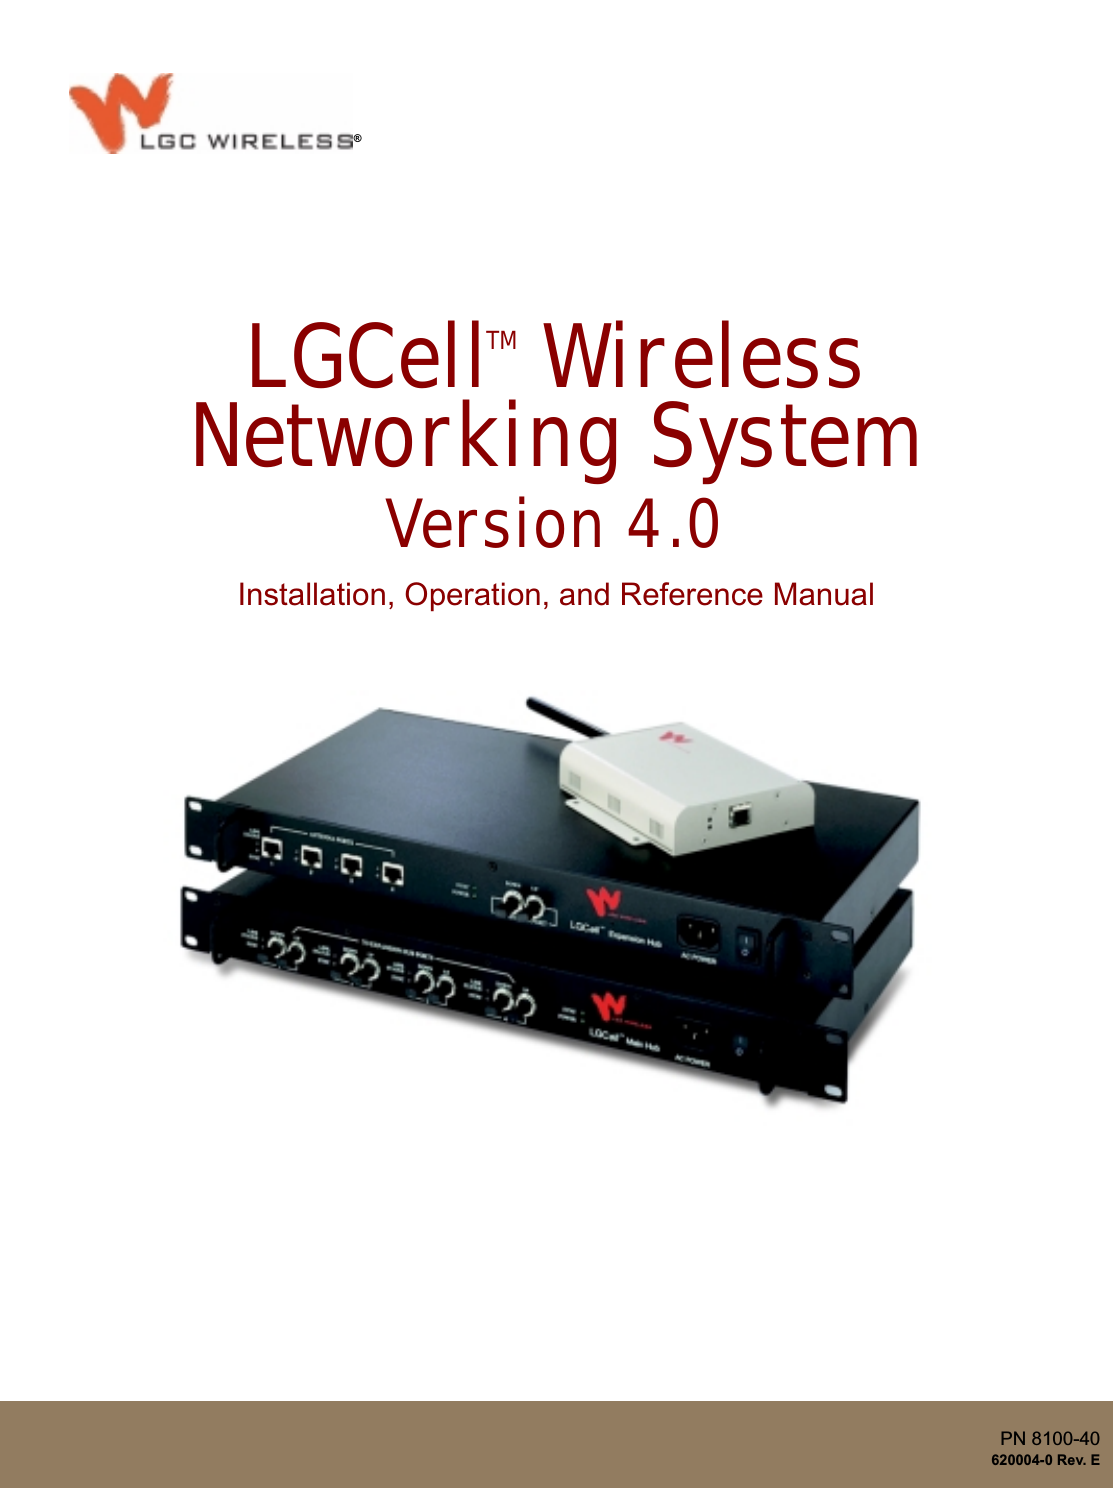 LGCell WirelessNetworking SystemVersion 4.0TM®Installation, Operation, and Reference ManualPN 8100-40620004-0 Rev. E